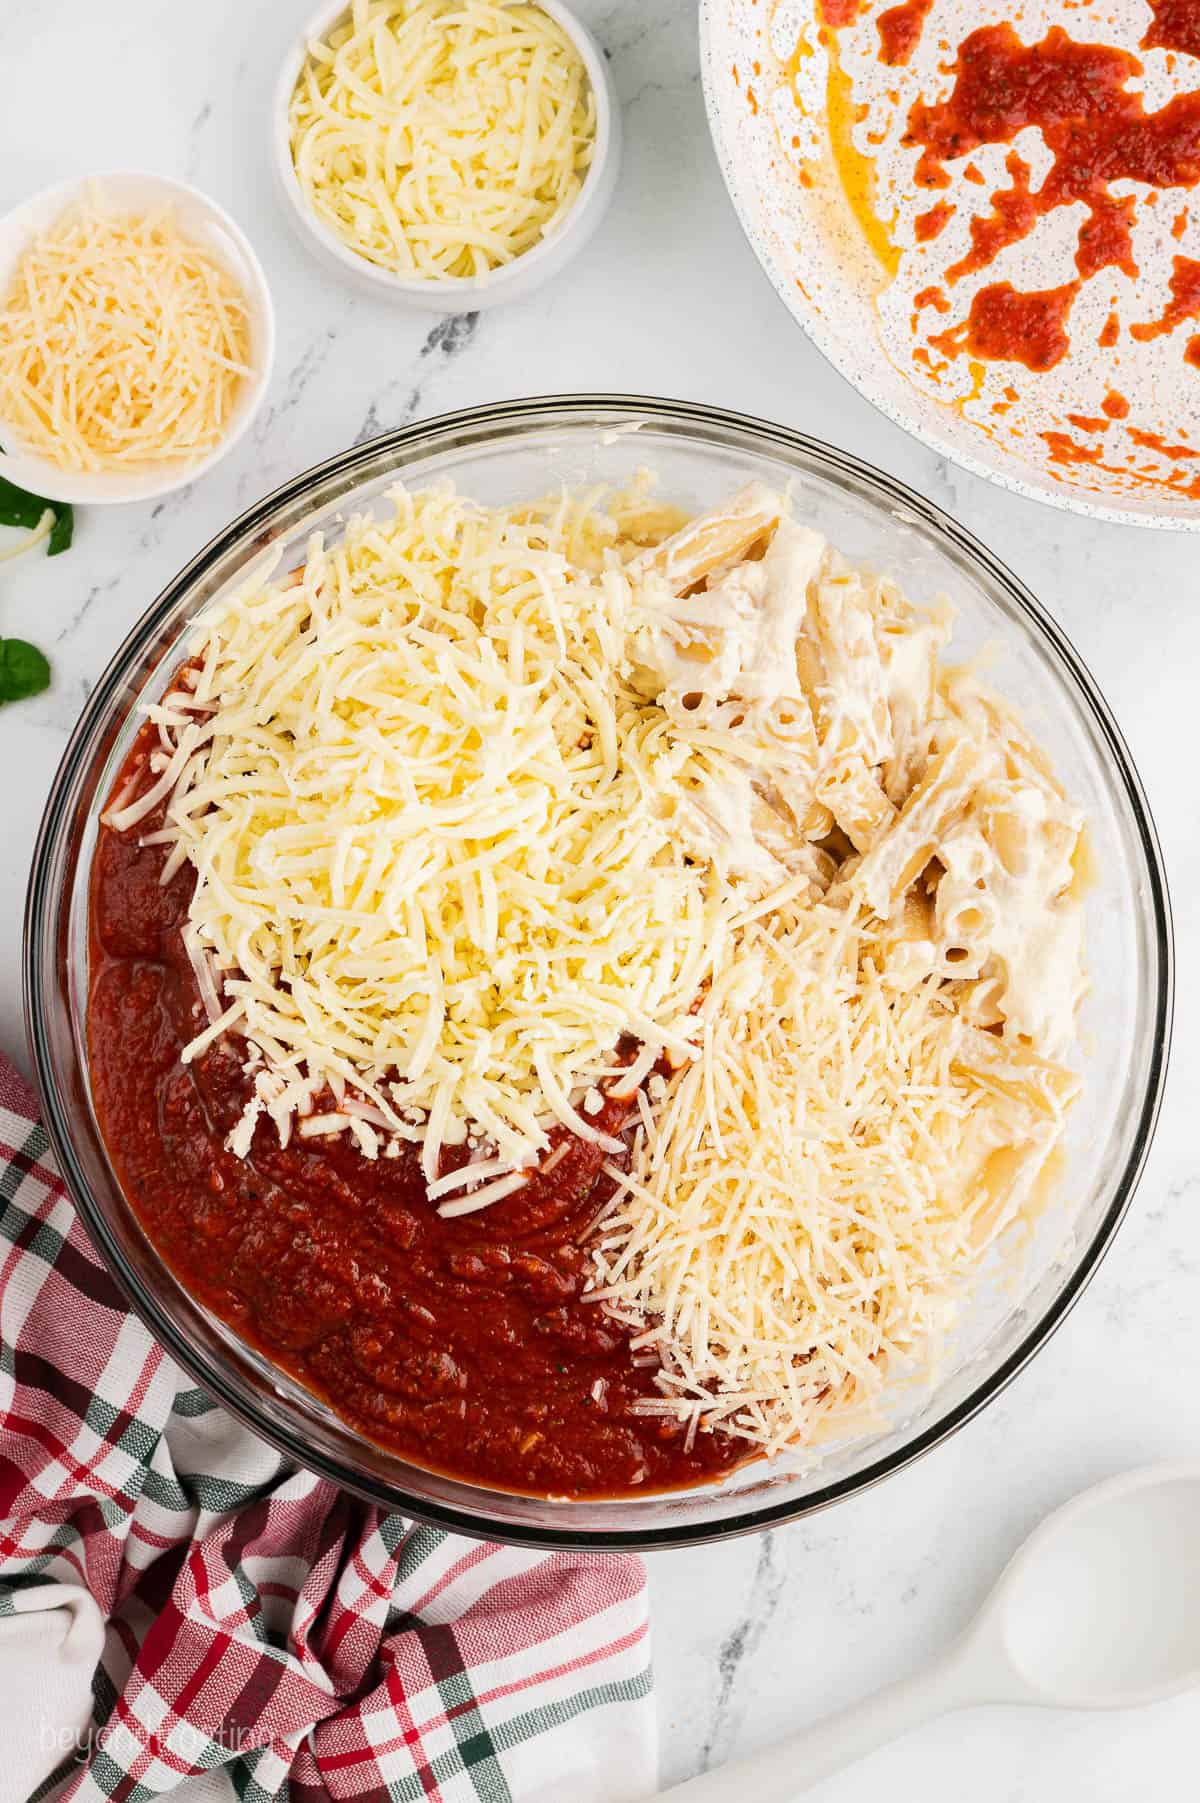 Ziti pasta, shredded cheese, and pasta sauce in a bowl